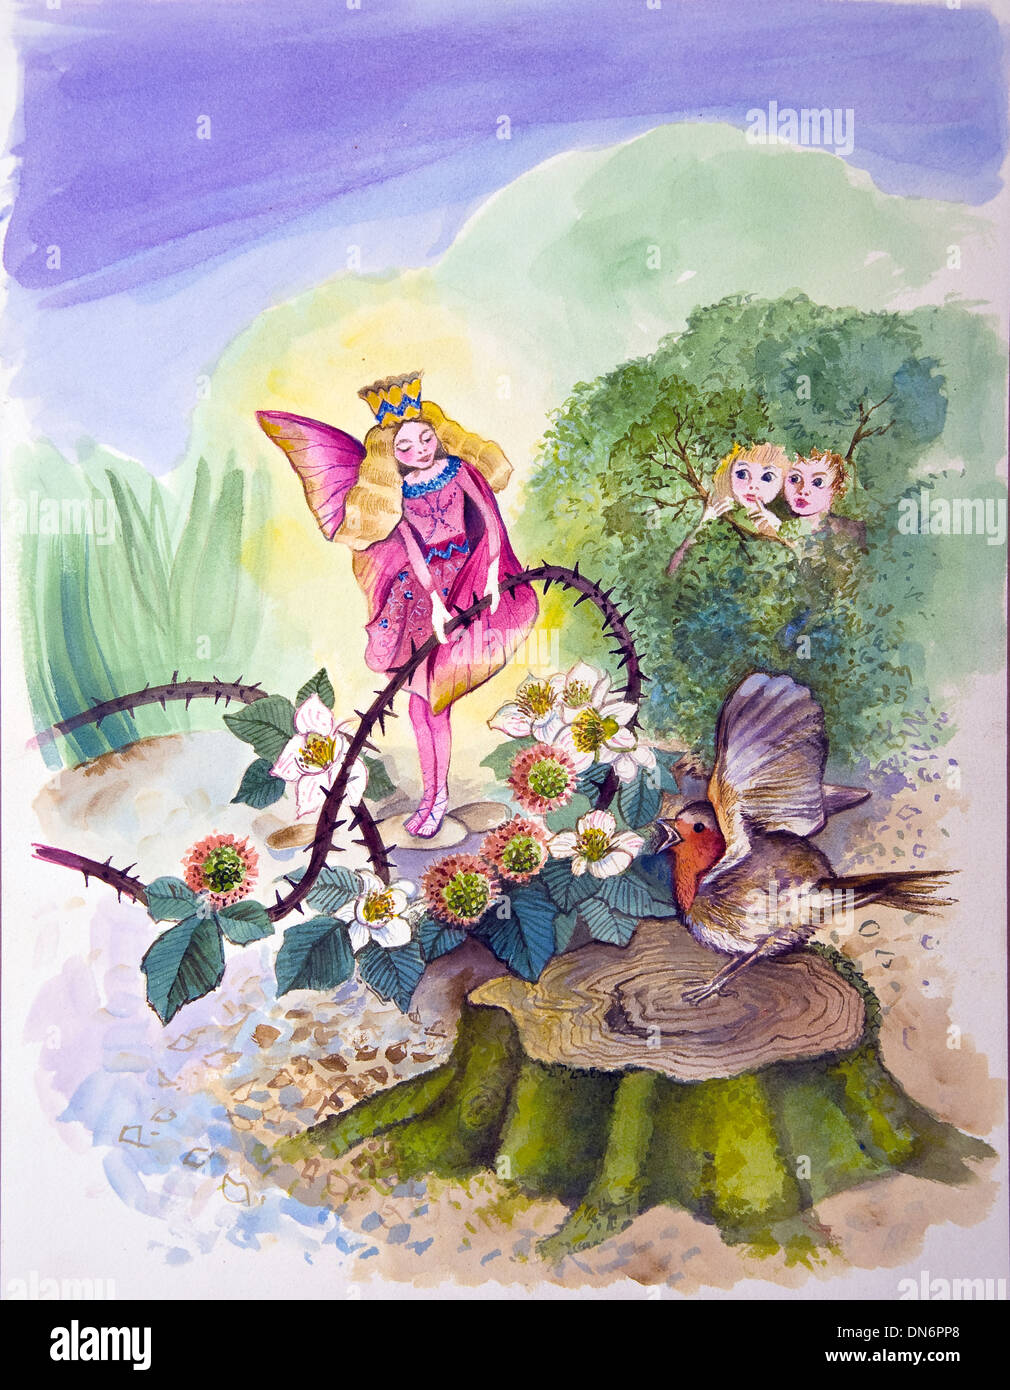 Illustration of a fairy with her wing caught in a bramble and a robin flapping its wings nearby Stock Photo